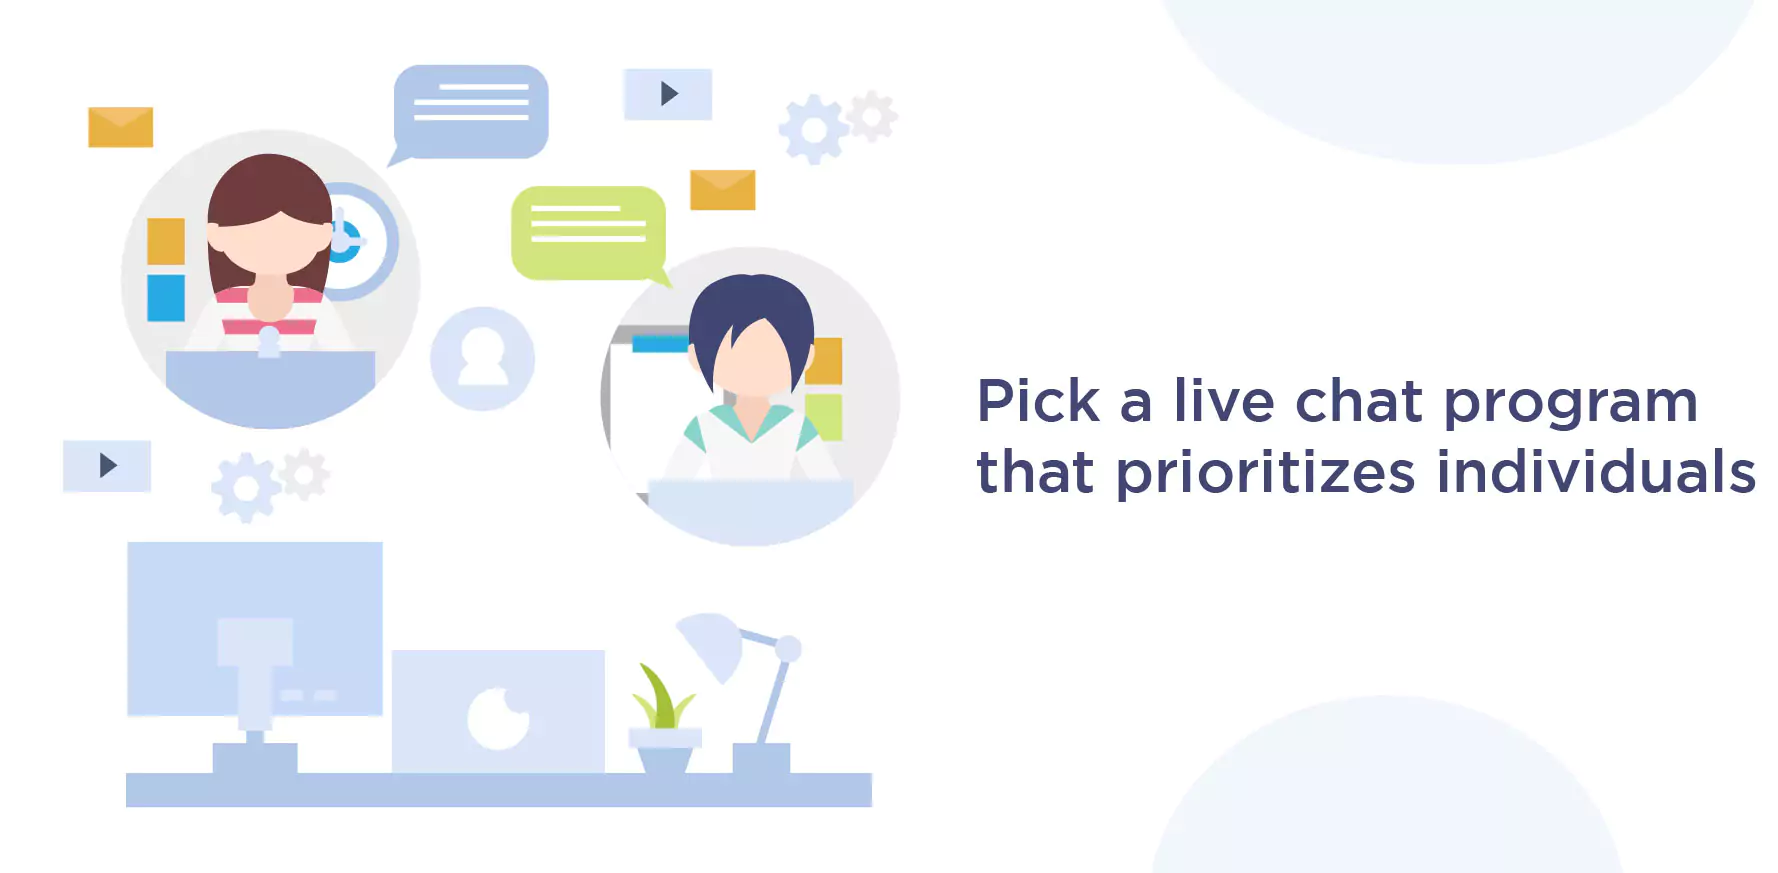 Pick a live chat program that prioritizes individuals.